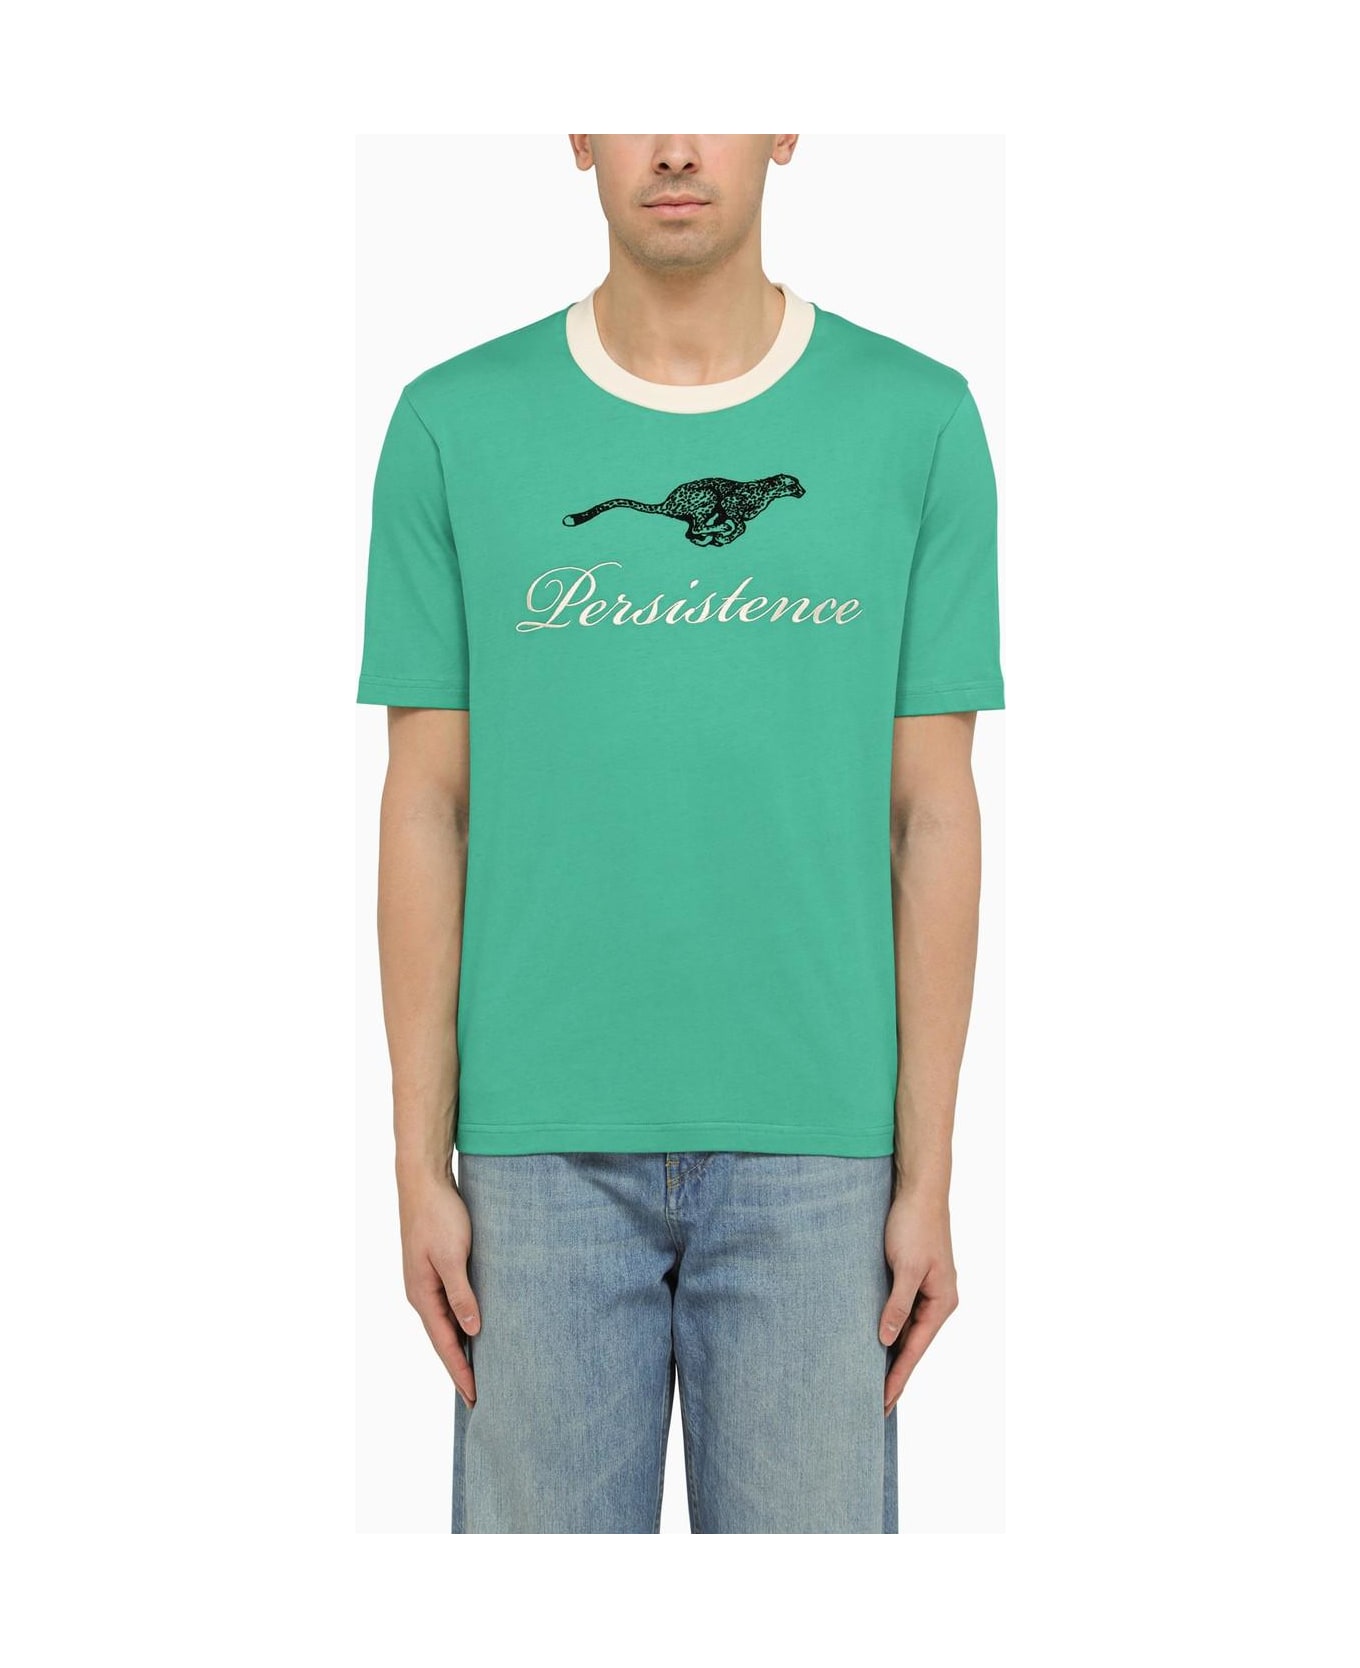 Wales Bonner Green Cotton T-shirt With Print - GREEN